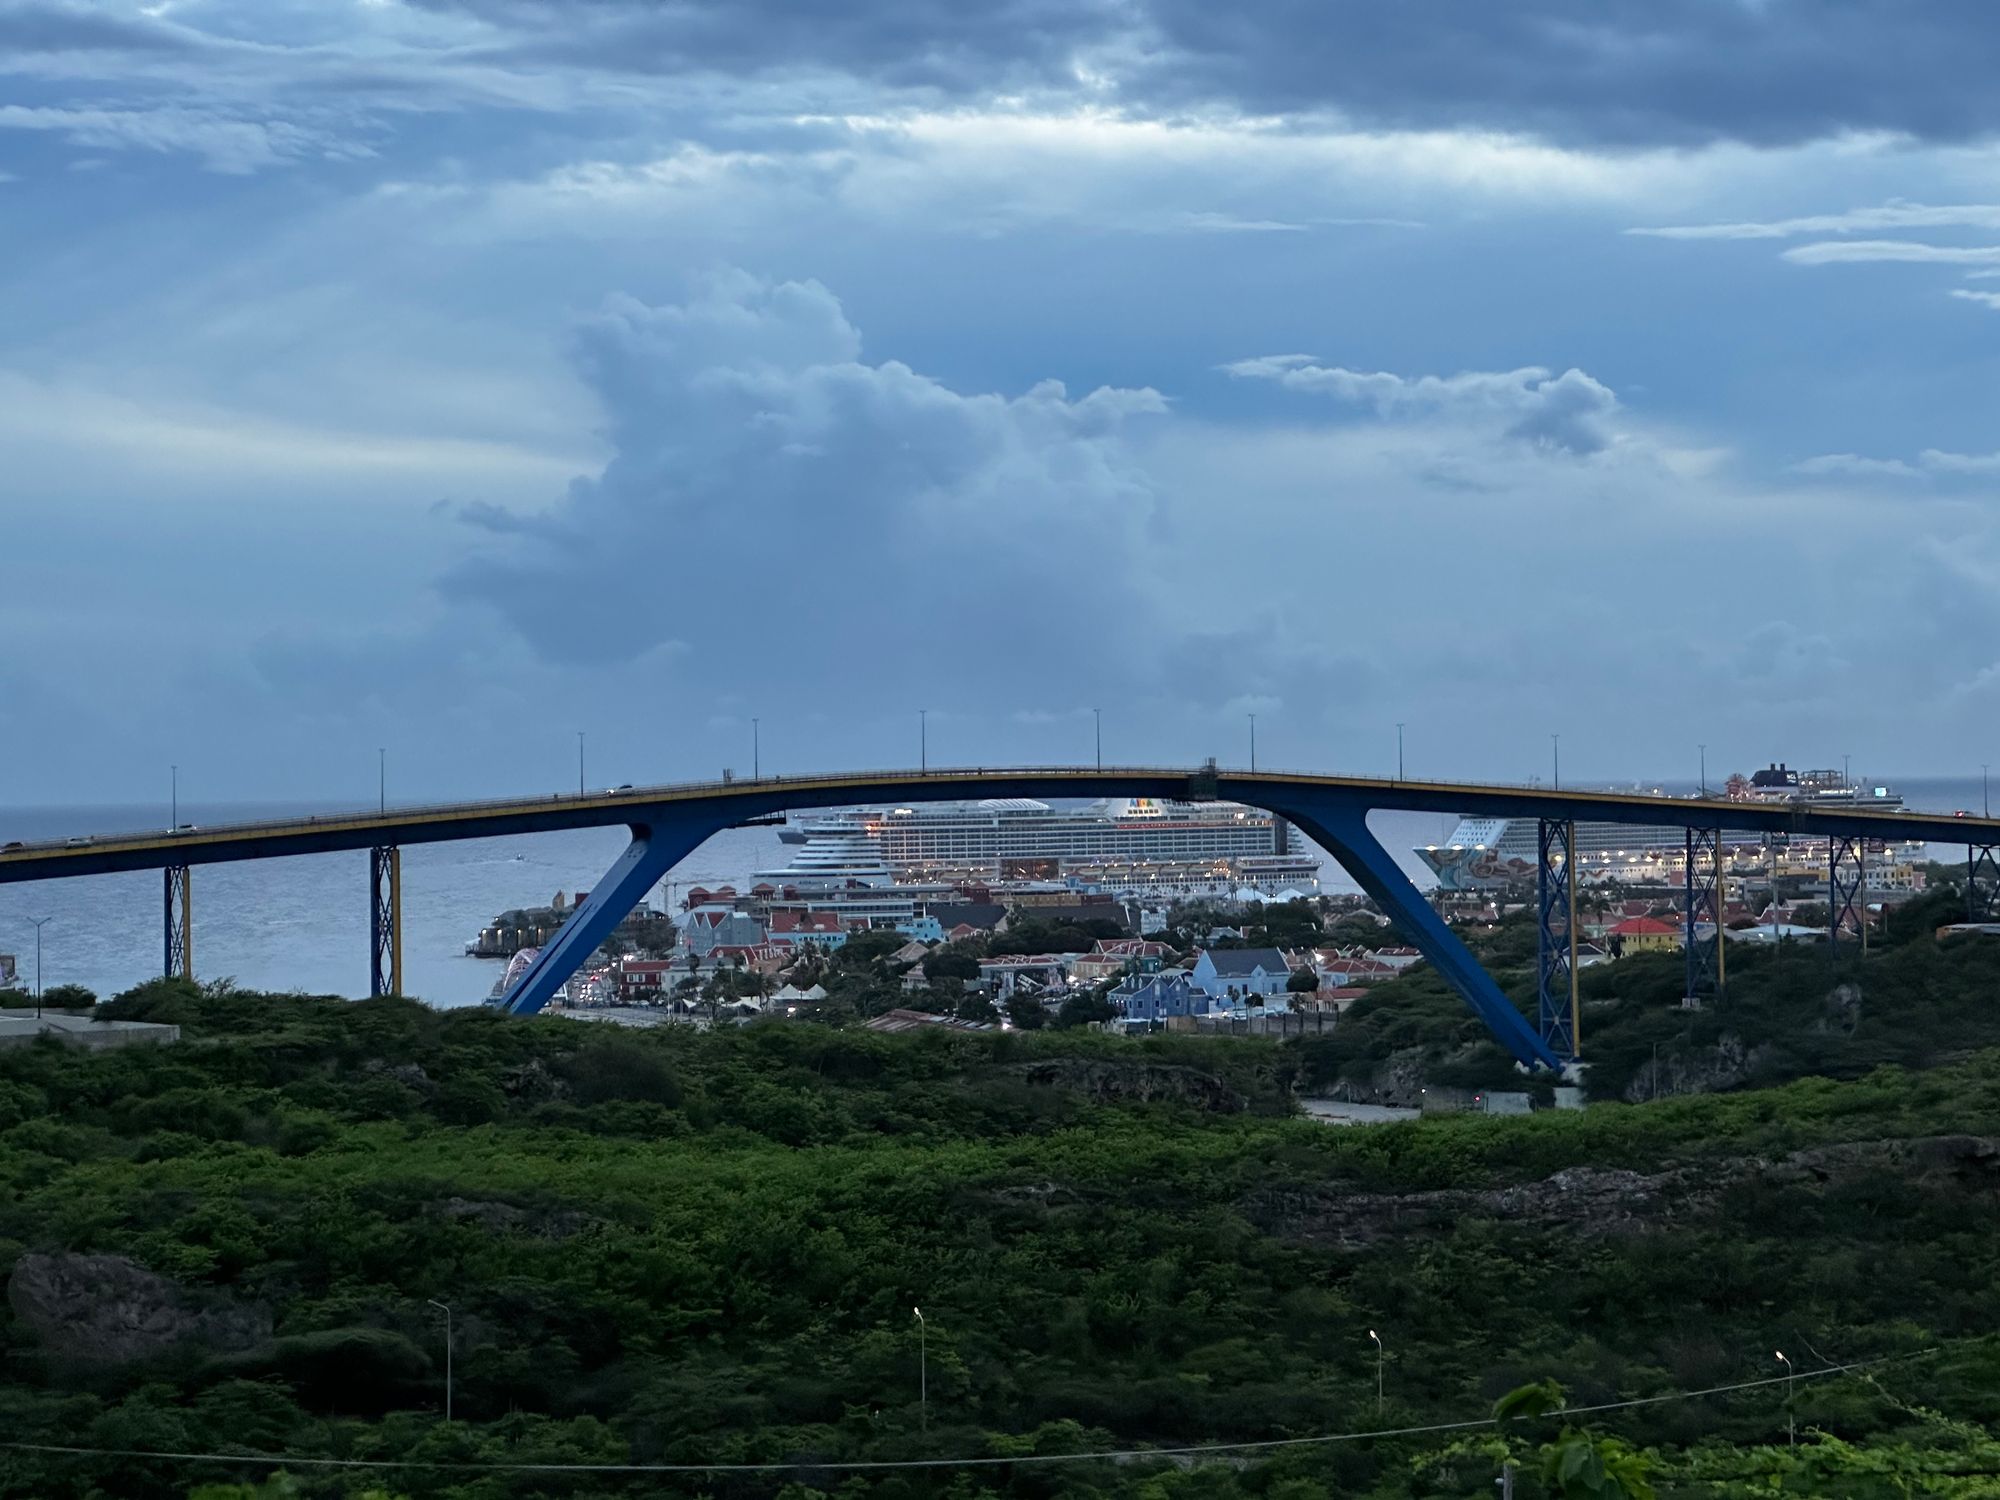 The Wonders of the Caribbean: Things to do in Curacao